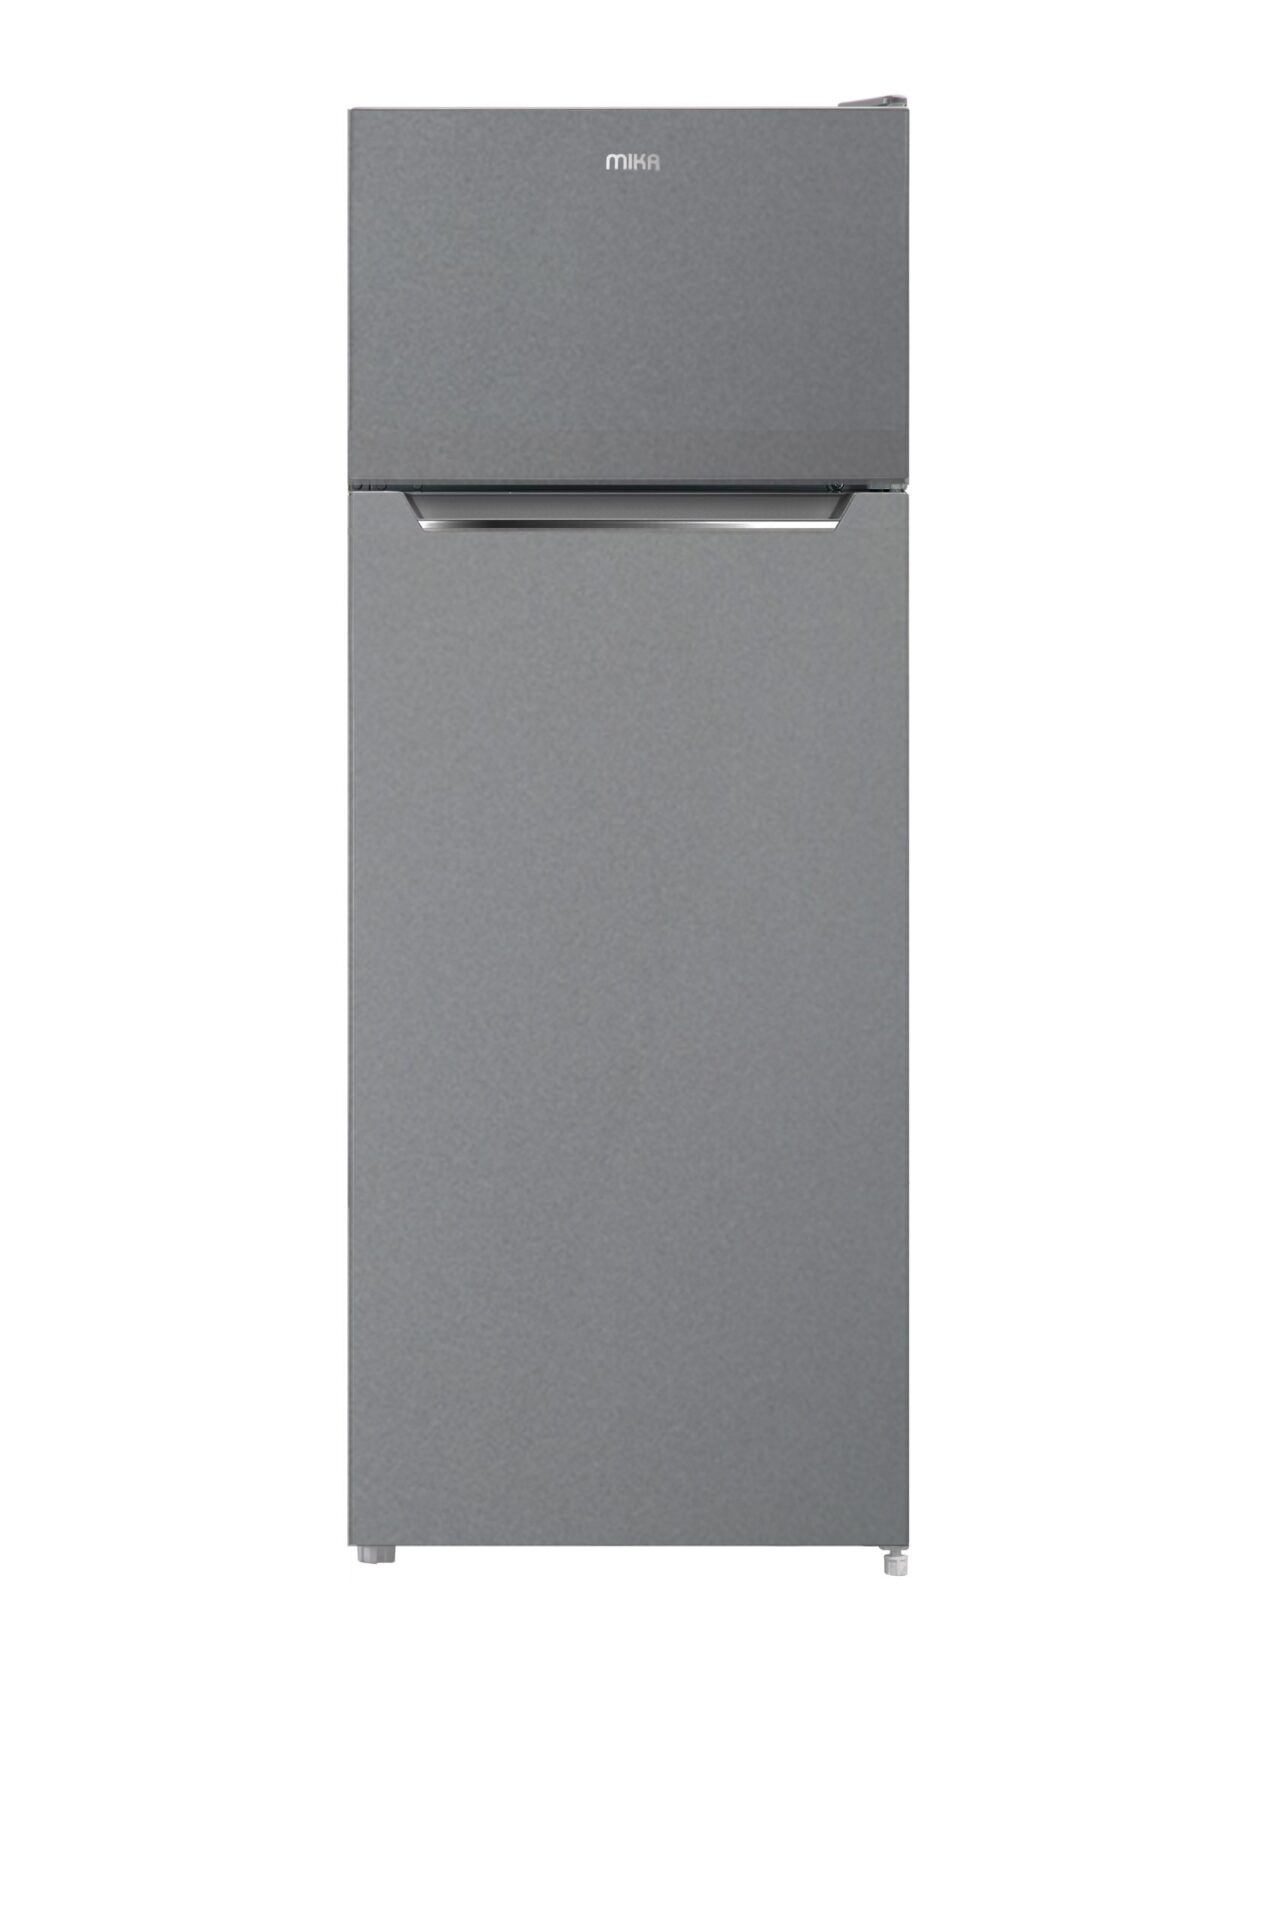 Mika Refrigerator, 211L, Direct Cool, Double Door, Shiny SS